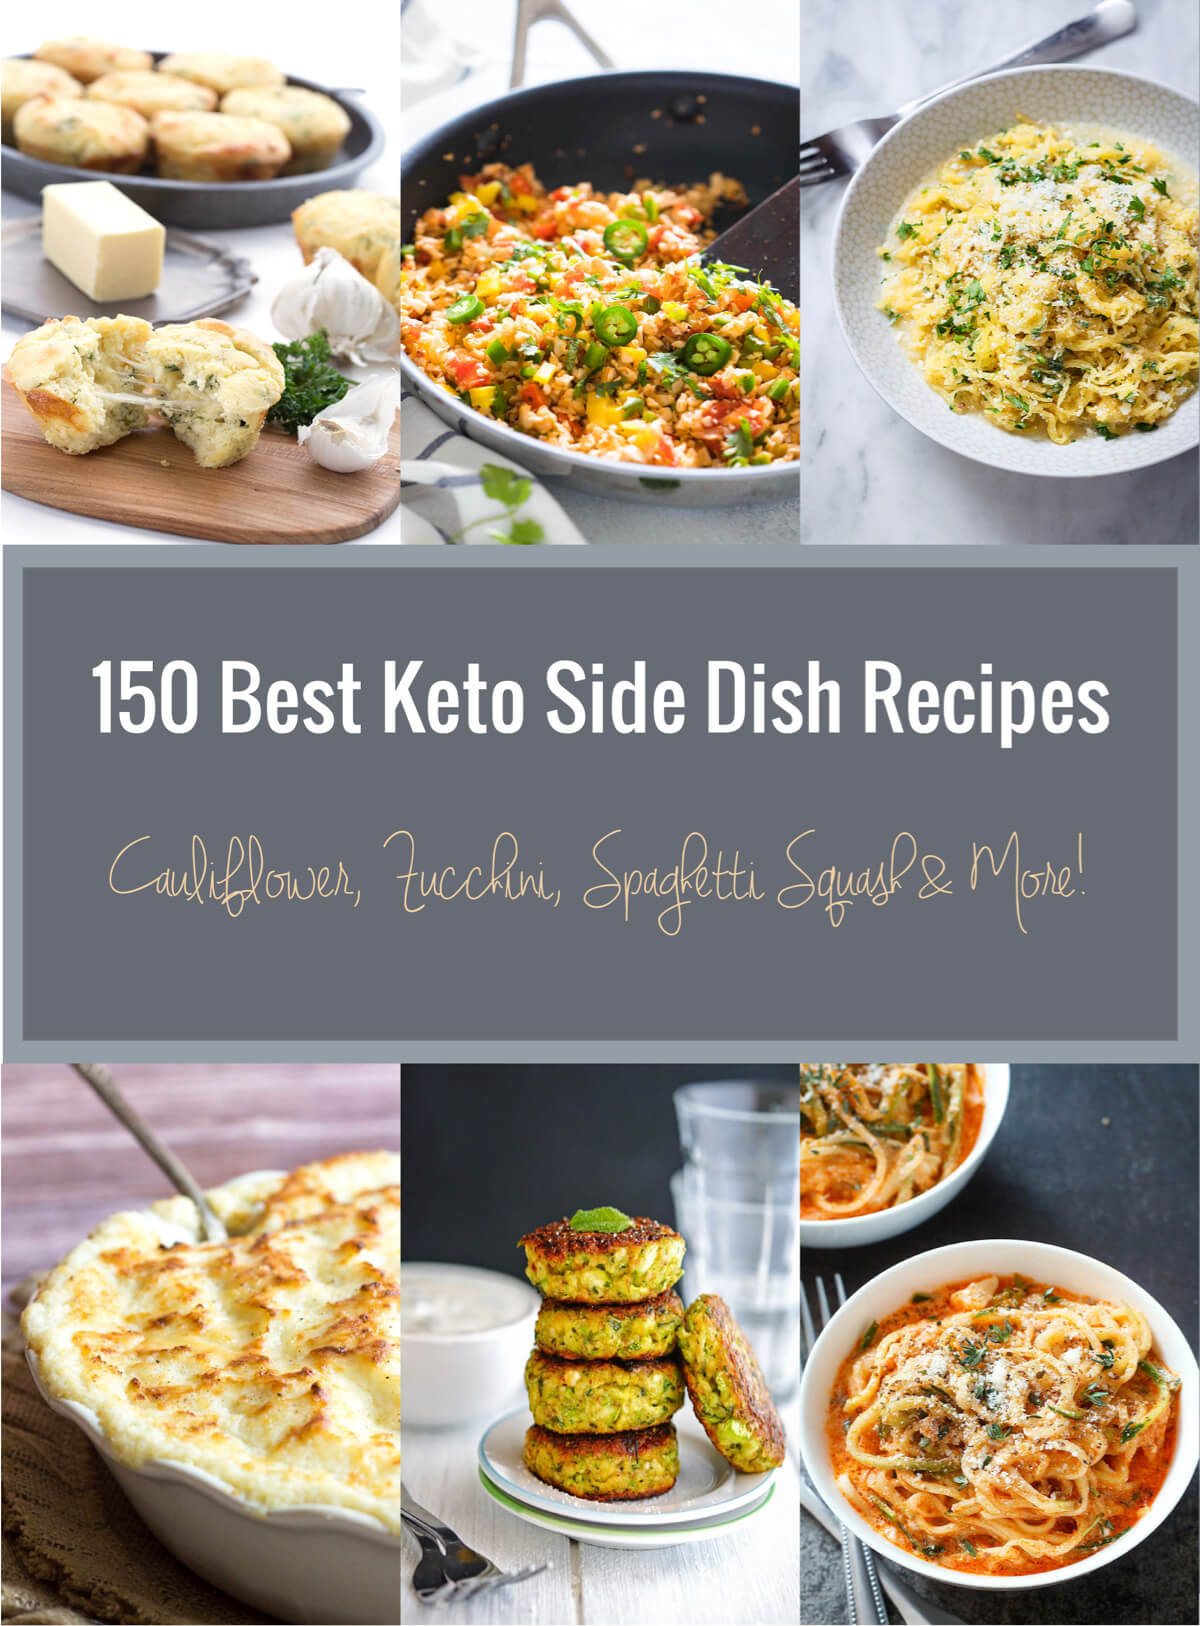 Keto Dinner Sides
 150 Best Keto Side Dish Recipes Low Carb